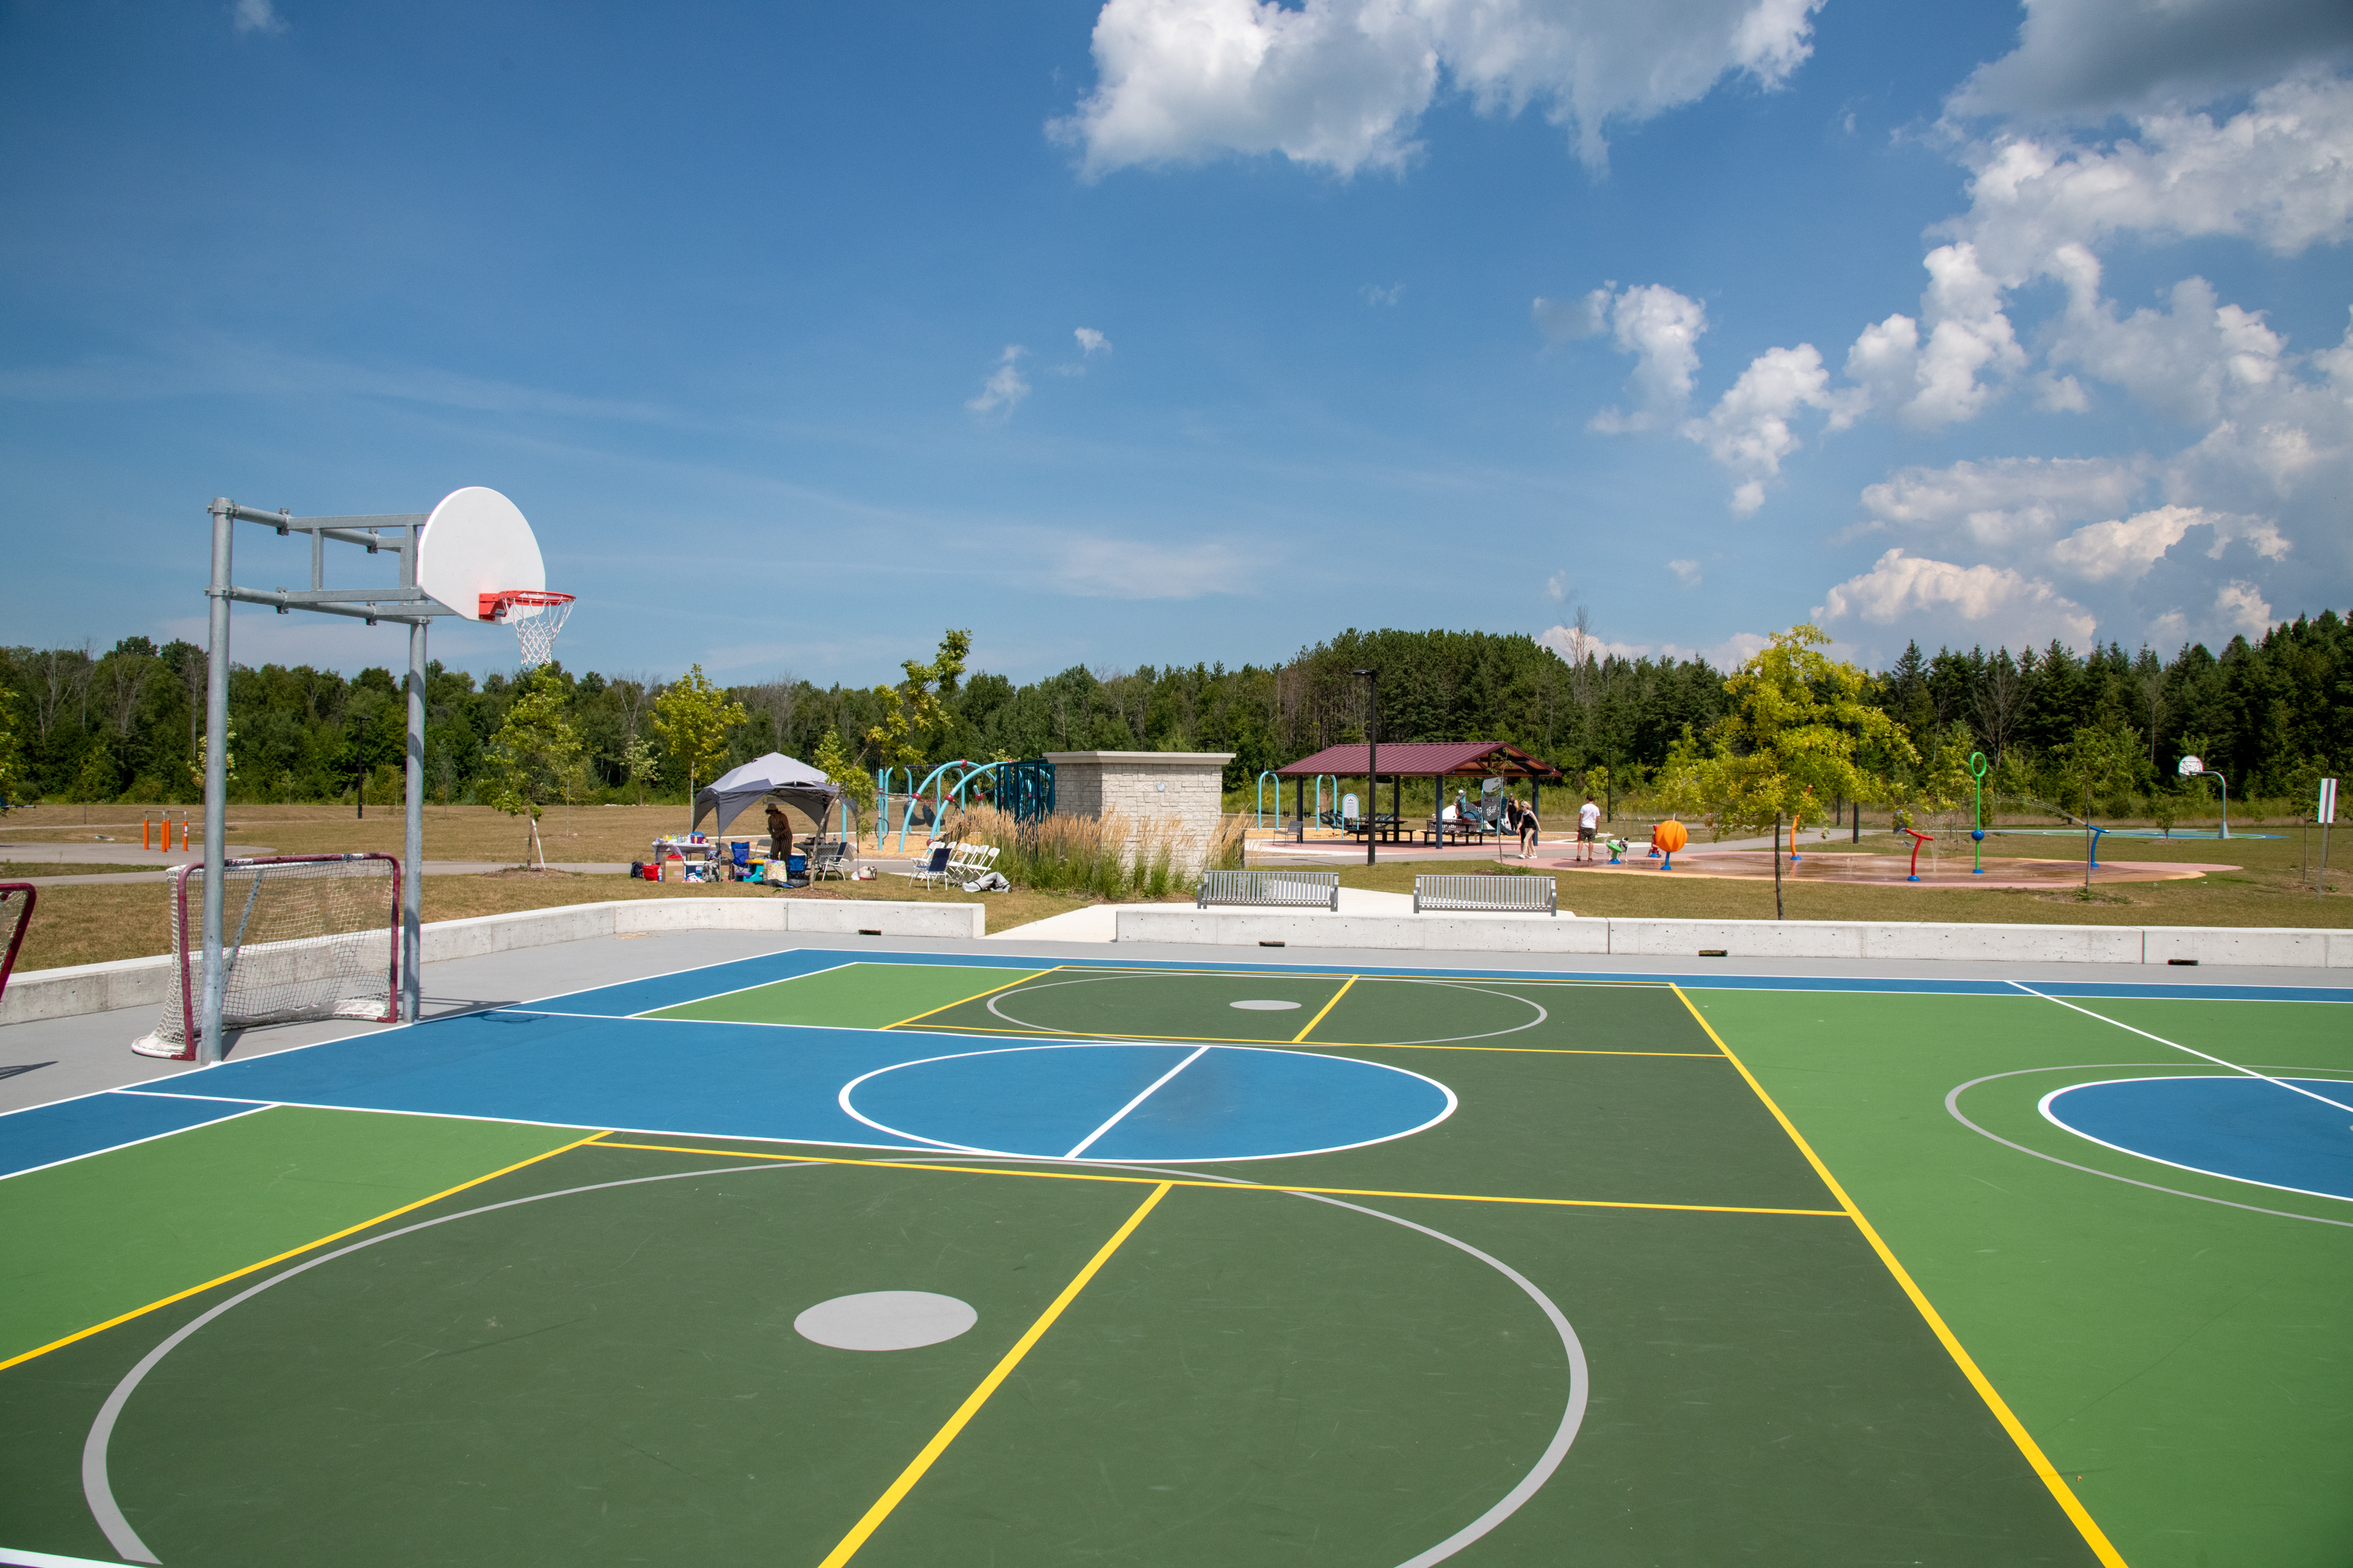 Brightly coloured basketball court with playground and pavillions in the background